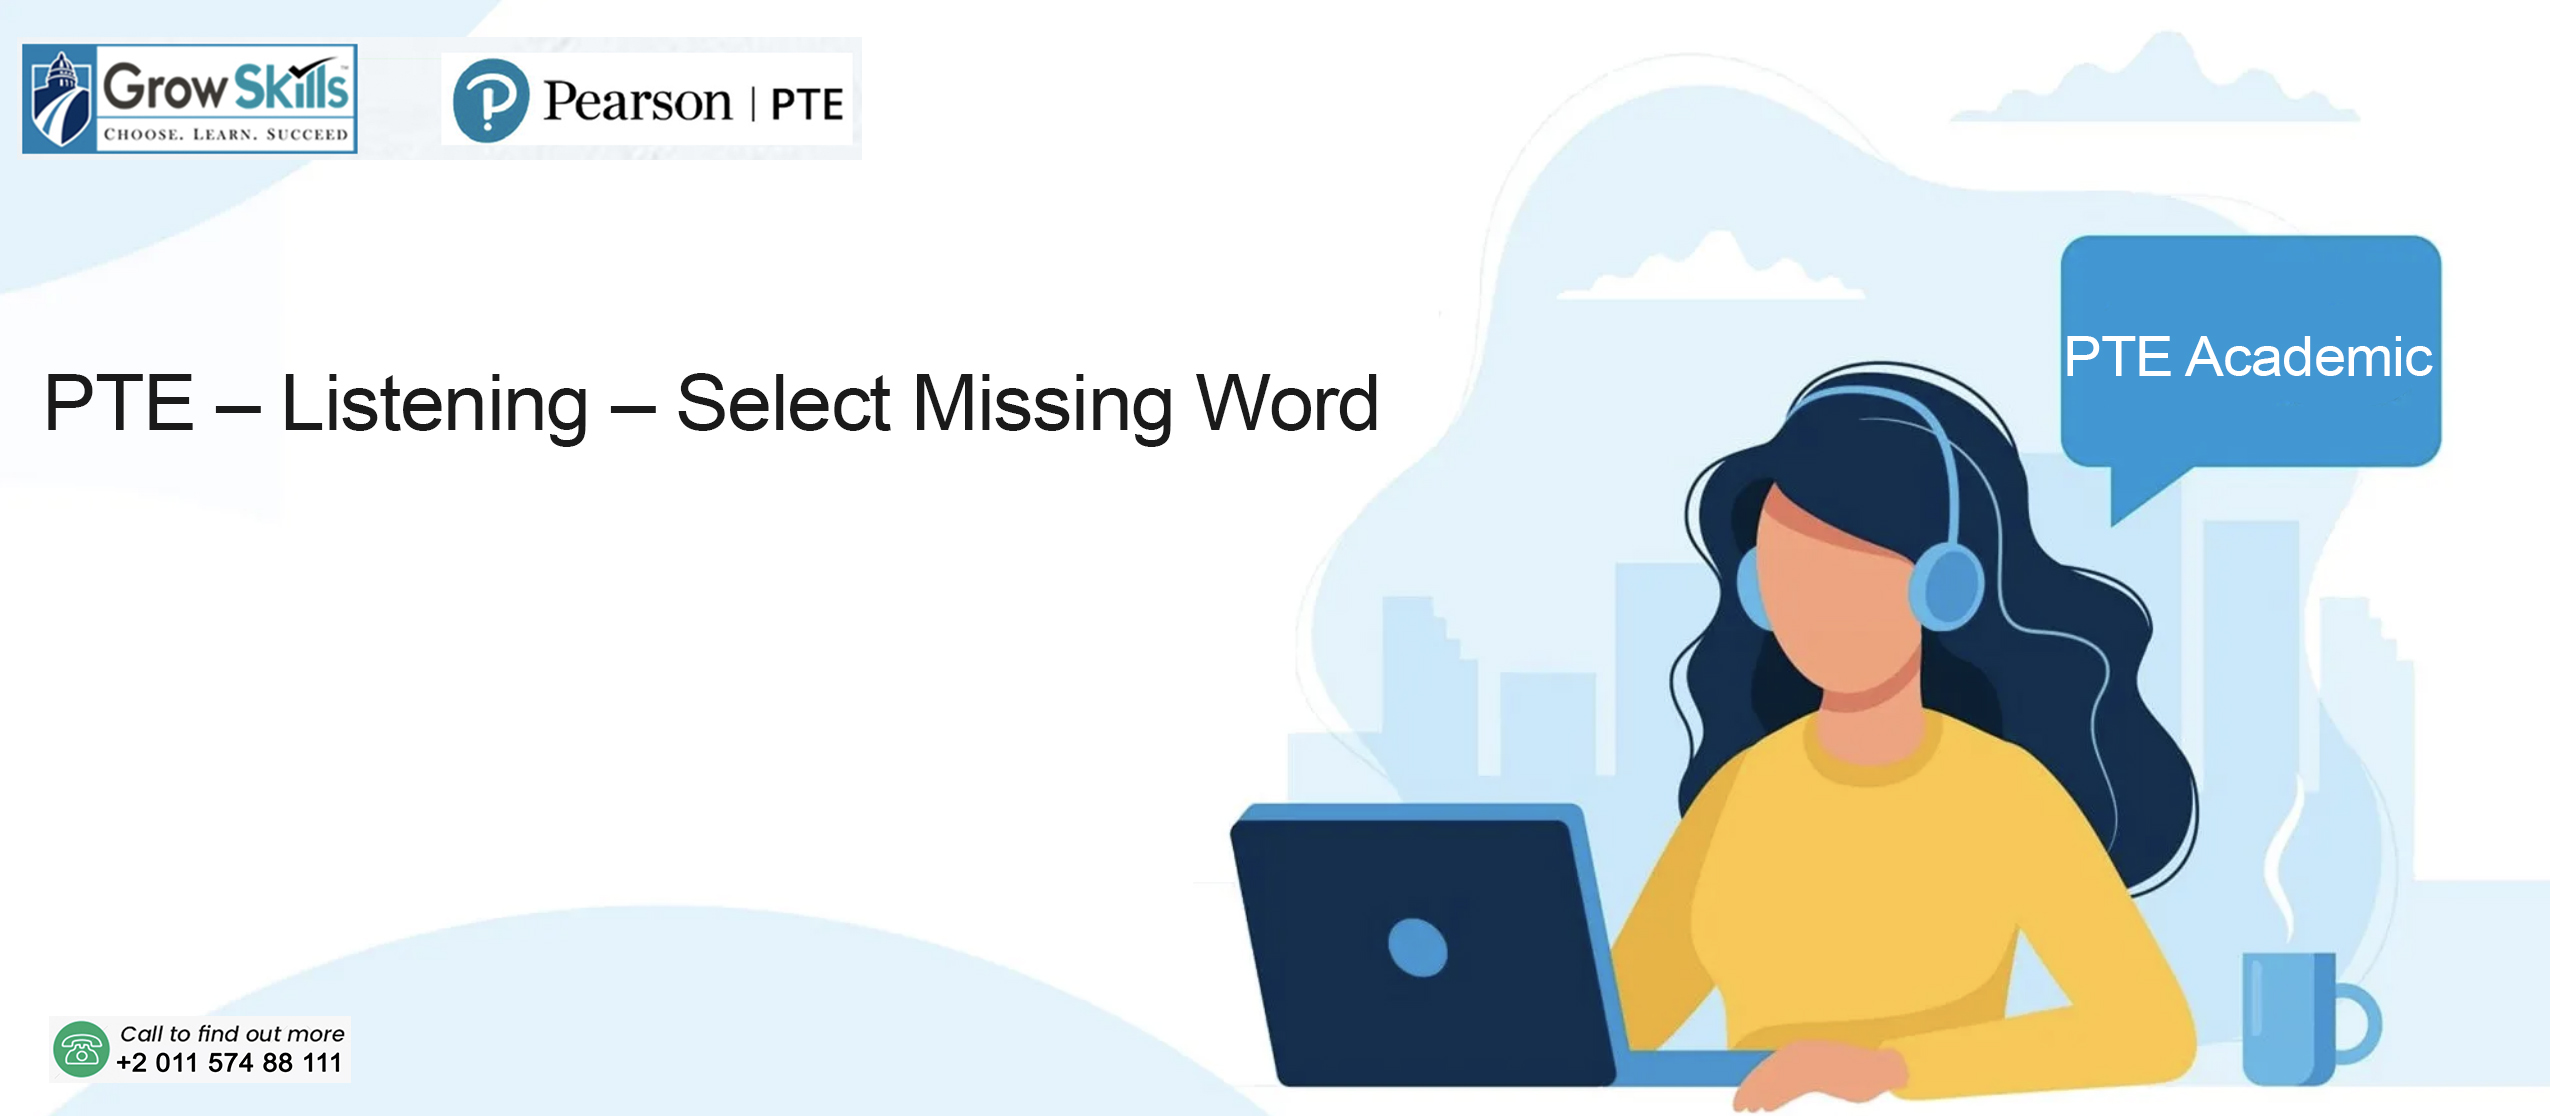 PTE – Listening – Select Missing Word